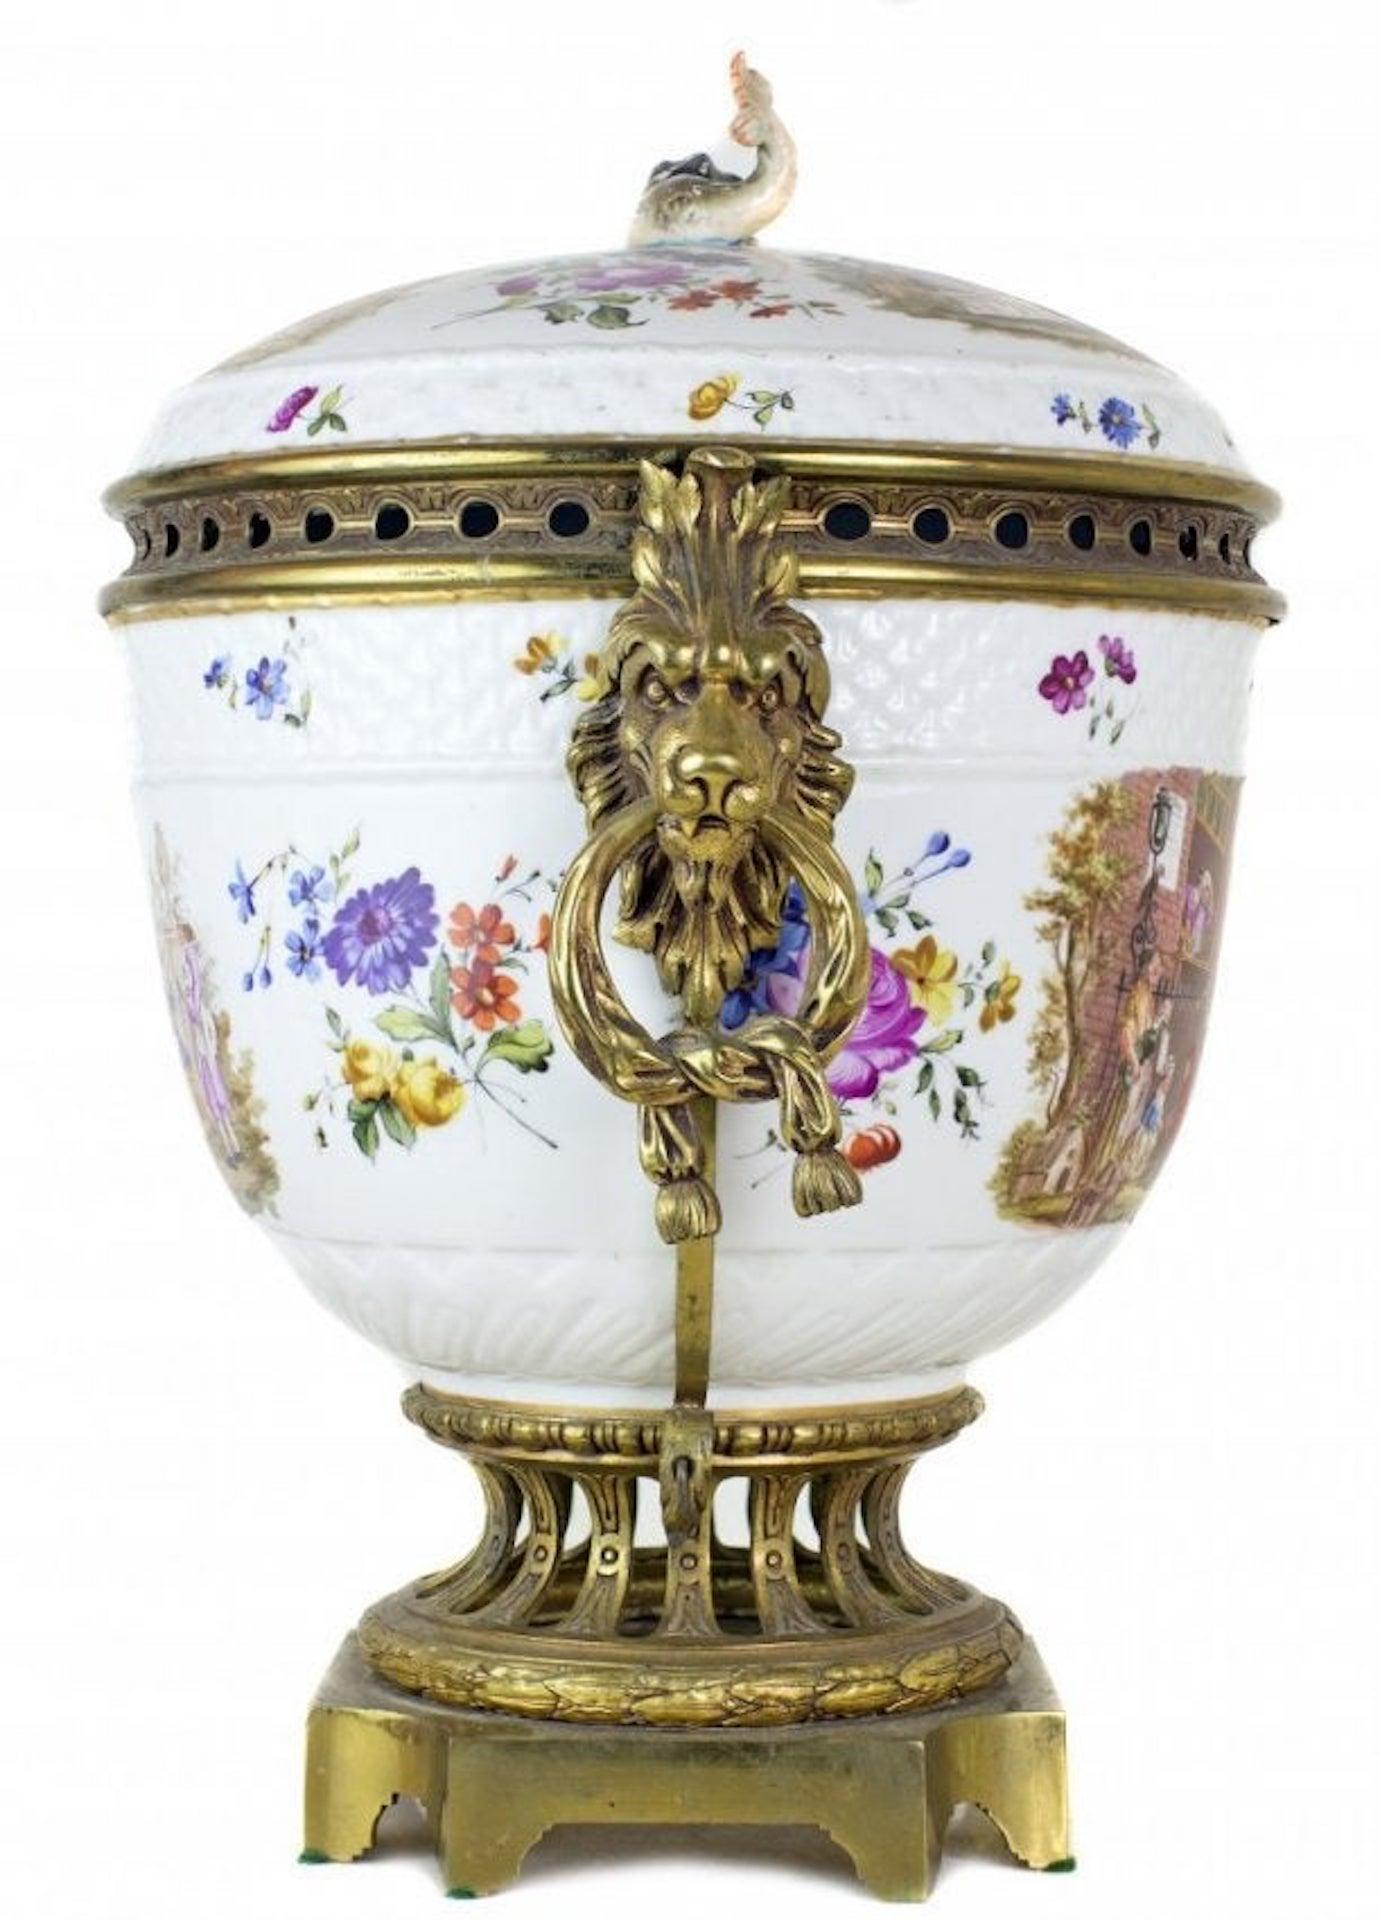 A continental gilt-bronze mounted porcelain potpourri
late 19th century,
the large round-form body topped by a domed lid and dolphin finial, the whole painted with satiric dinner scenes, fitted with a pieced rim flanked by lion's mask and ring